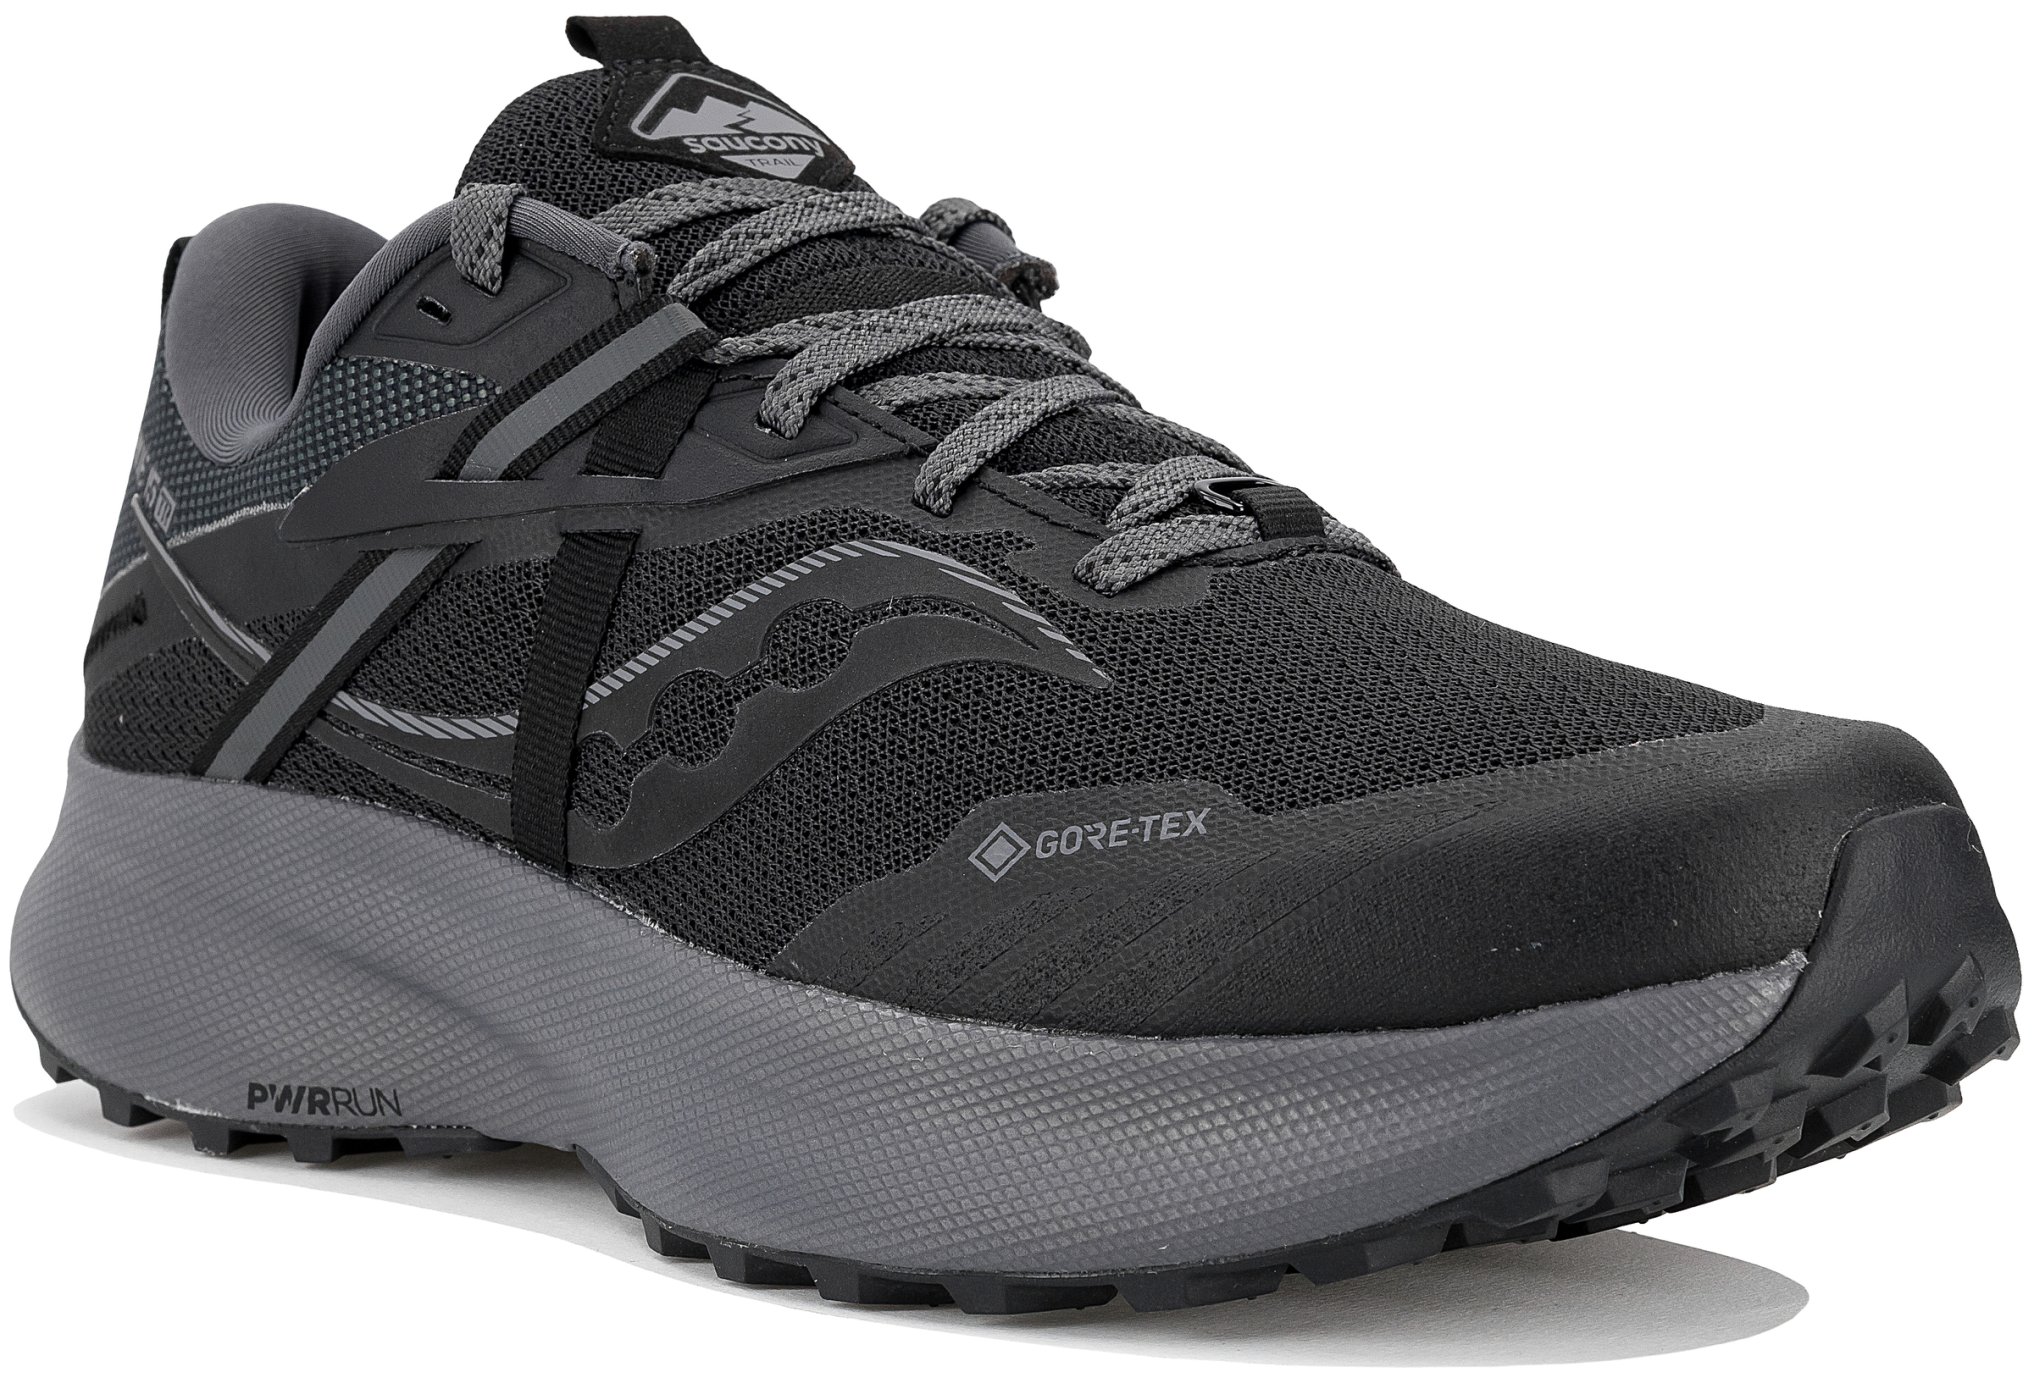 Saucony Ride 15 TR Gore-Tex M Chaussures homme